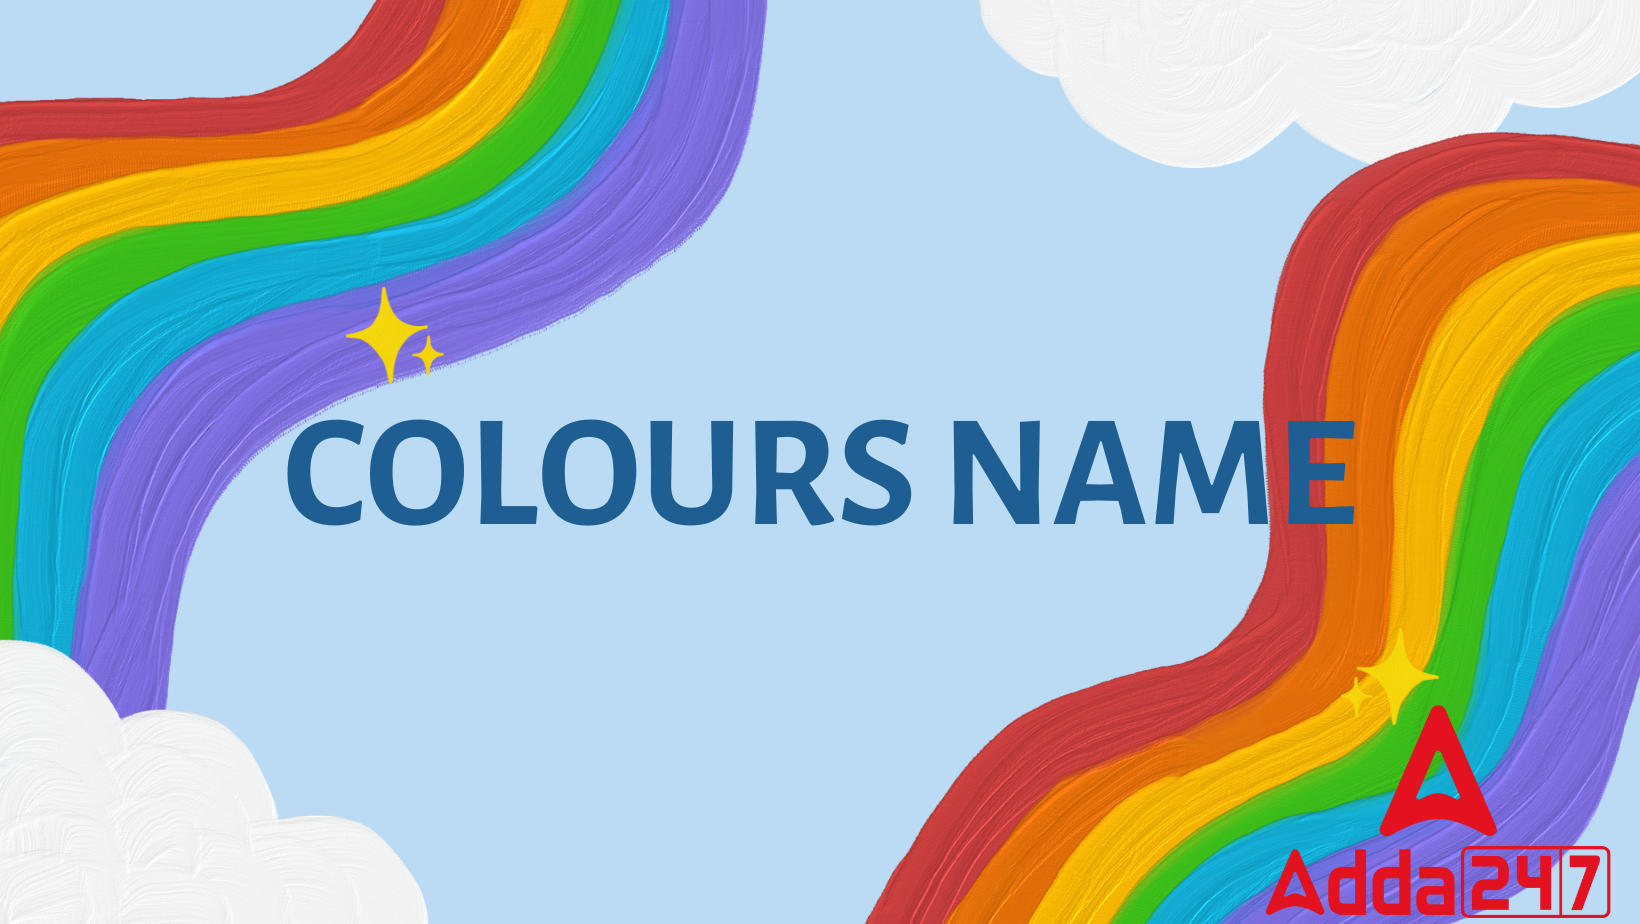 All Colours Name in English & Hindi